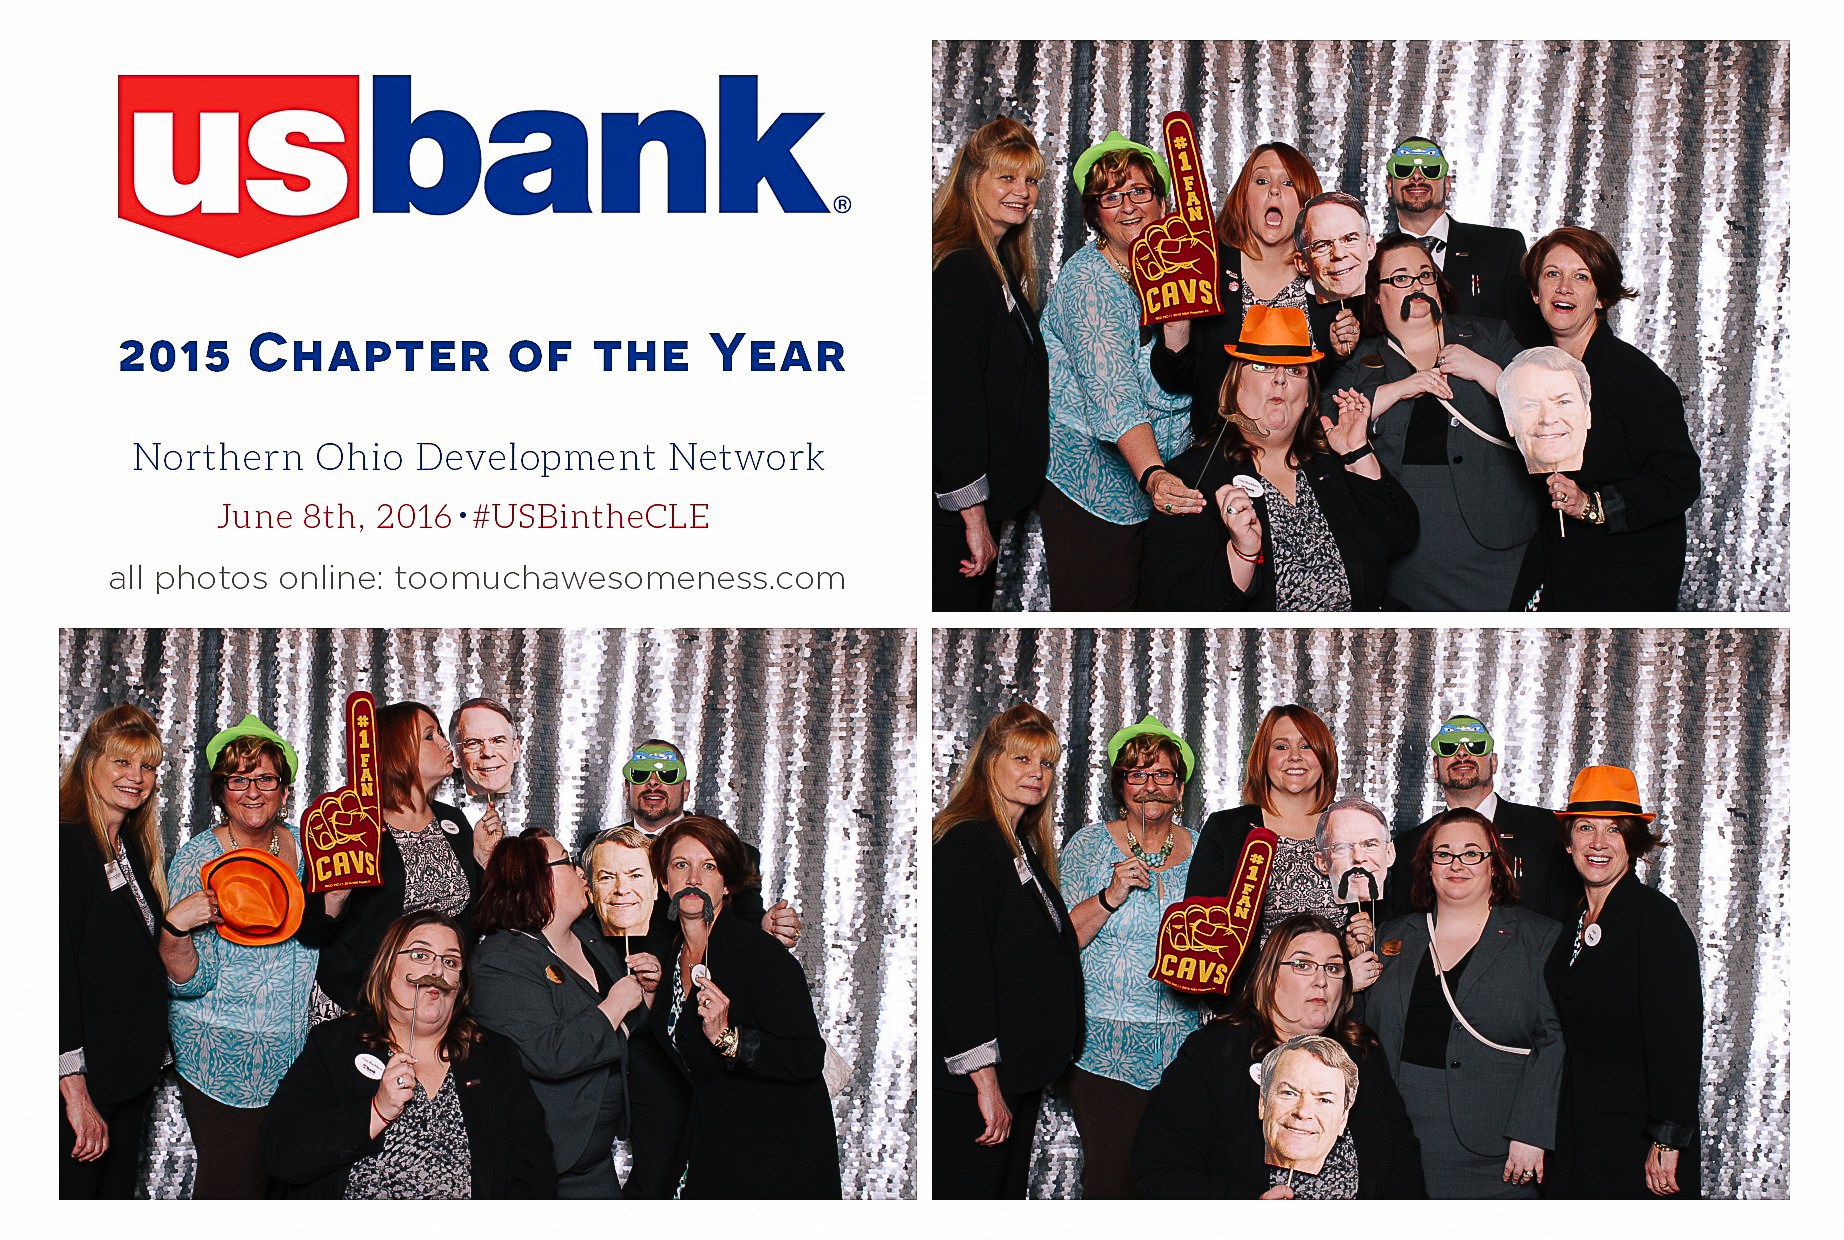 00212-US Bank Event Phtoobooth in Cleveland Too Much Awesomeness-20160608.jpg